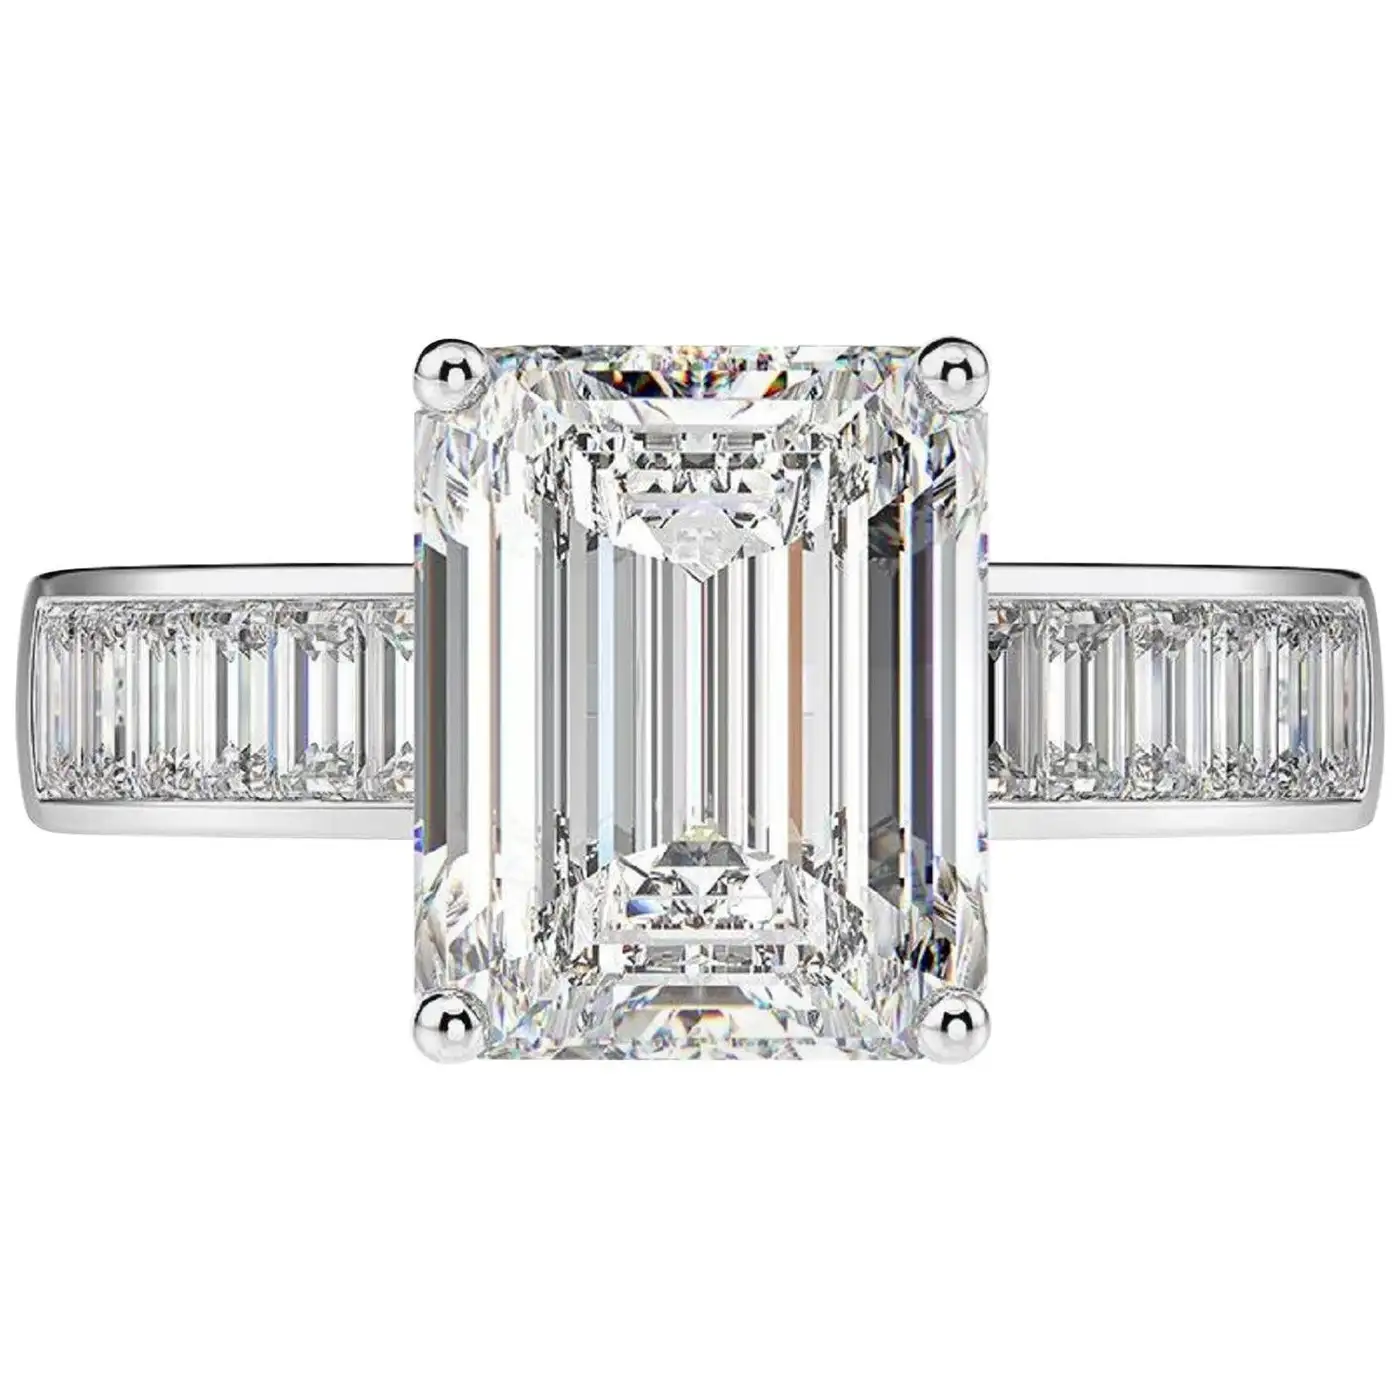 2.25 Carat Diamond Engagement Ring with Side Emerald Cut Diamonds GIA Certified